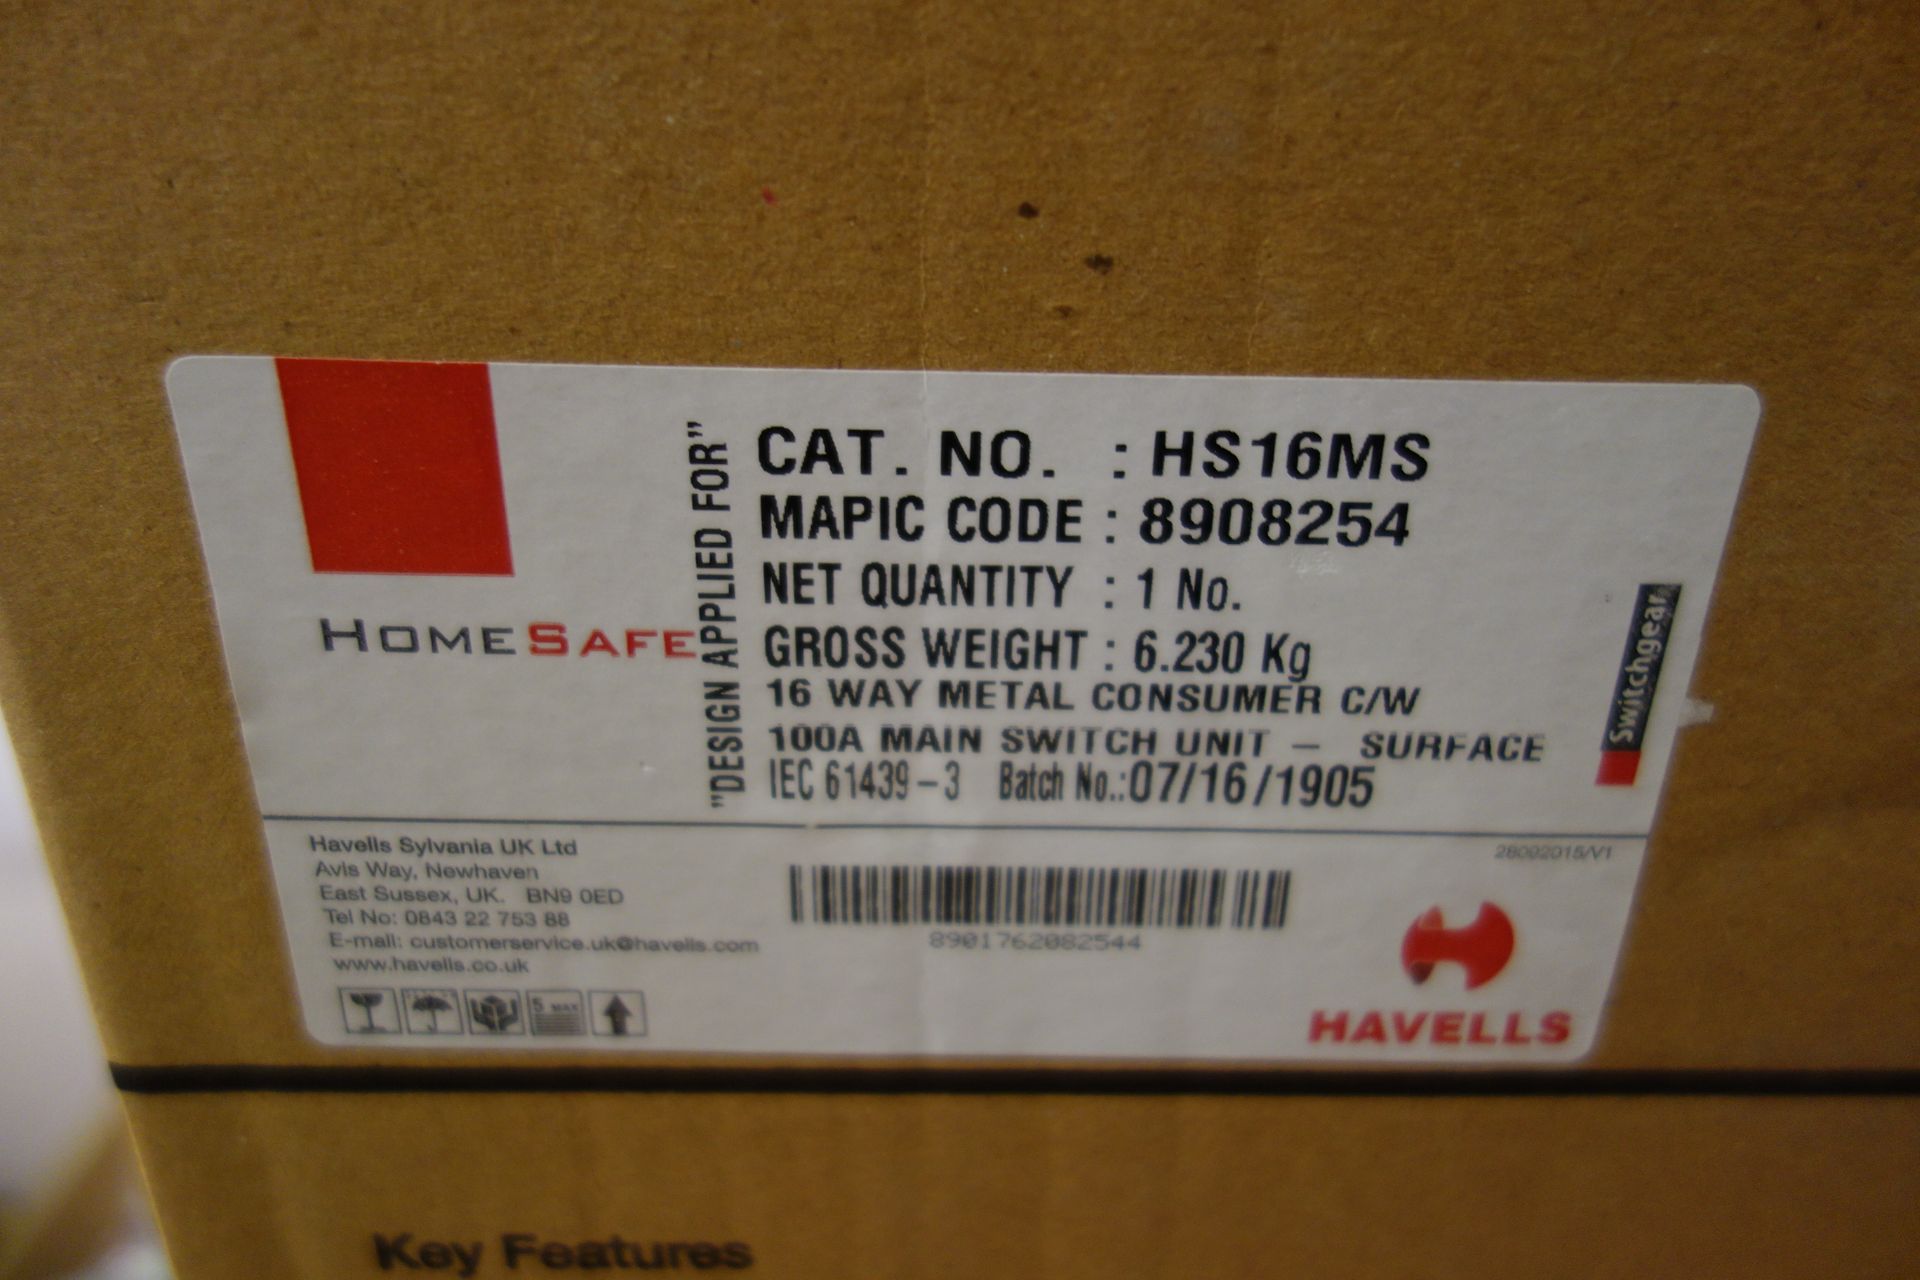 5 X Havells HS16MS 16W Metal Consumer C/W 100A Main Switch Unit - Image 2 of 2